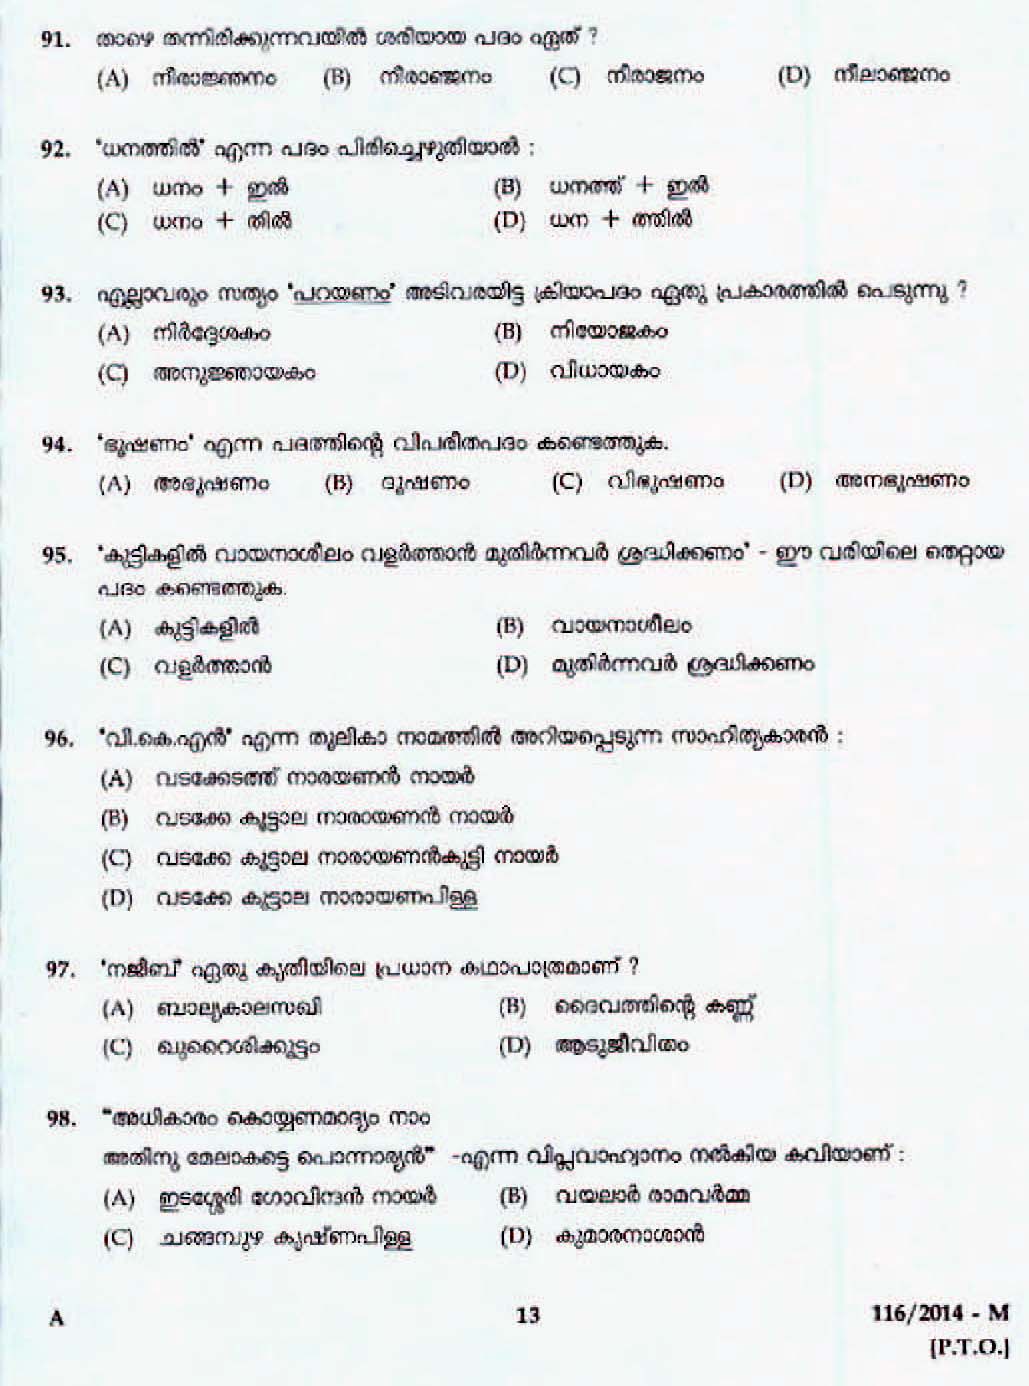 LD Clerk Various All Districts Question Paper Malayalam 2014 Paper Code 1162014 M 11